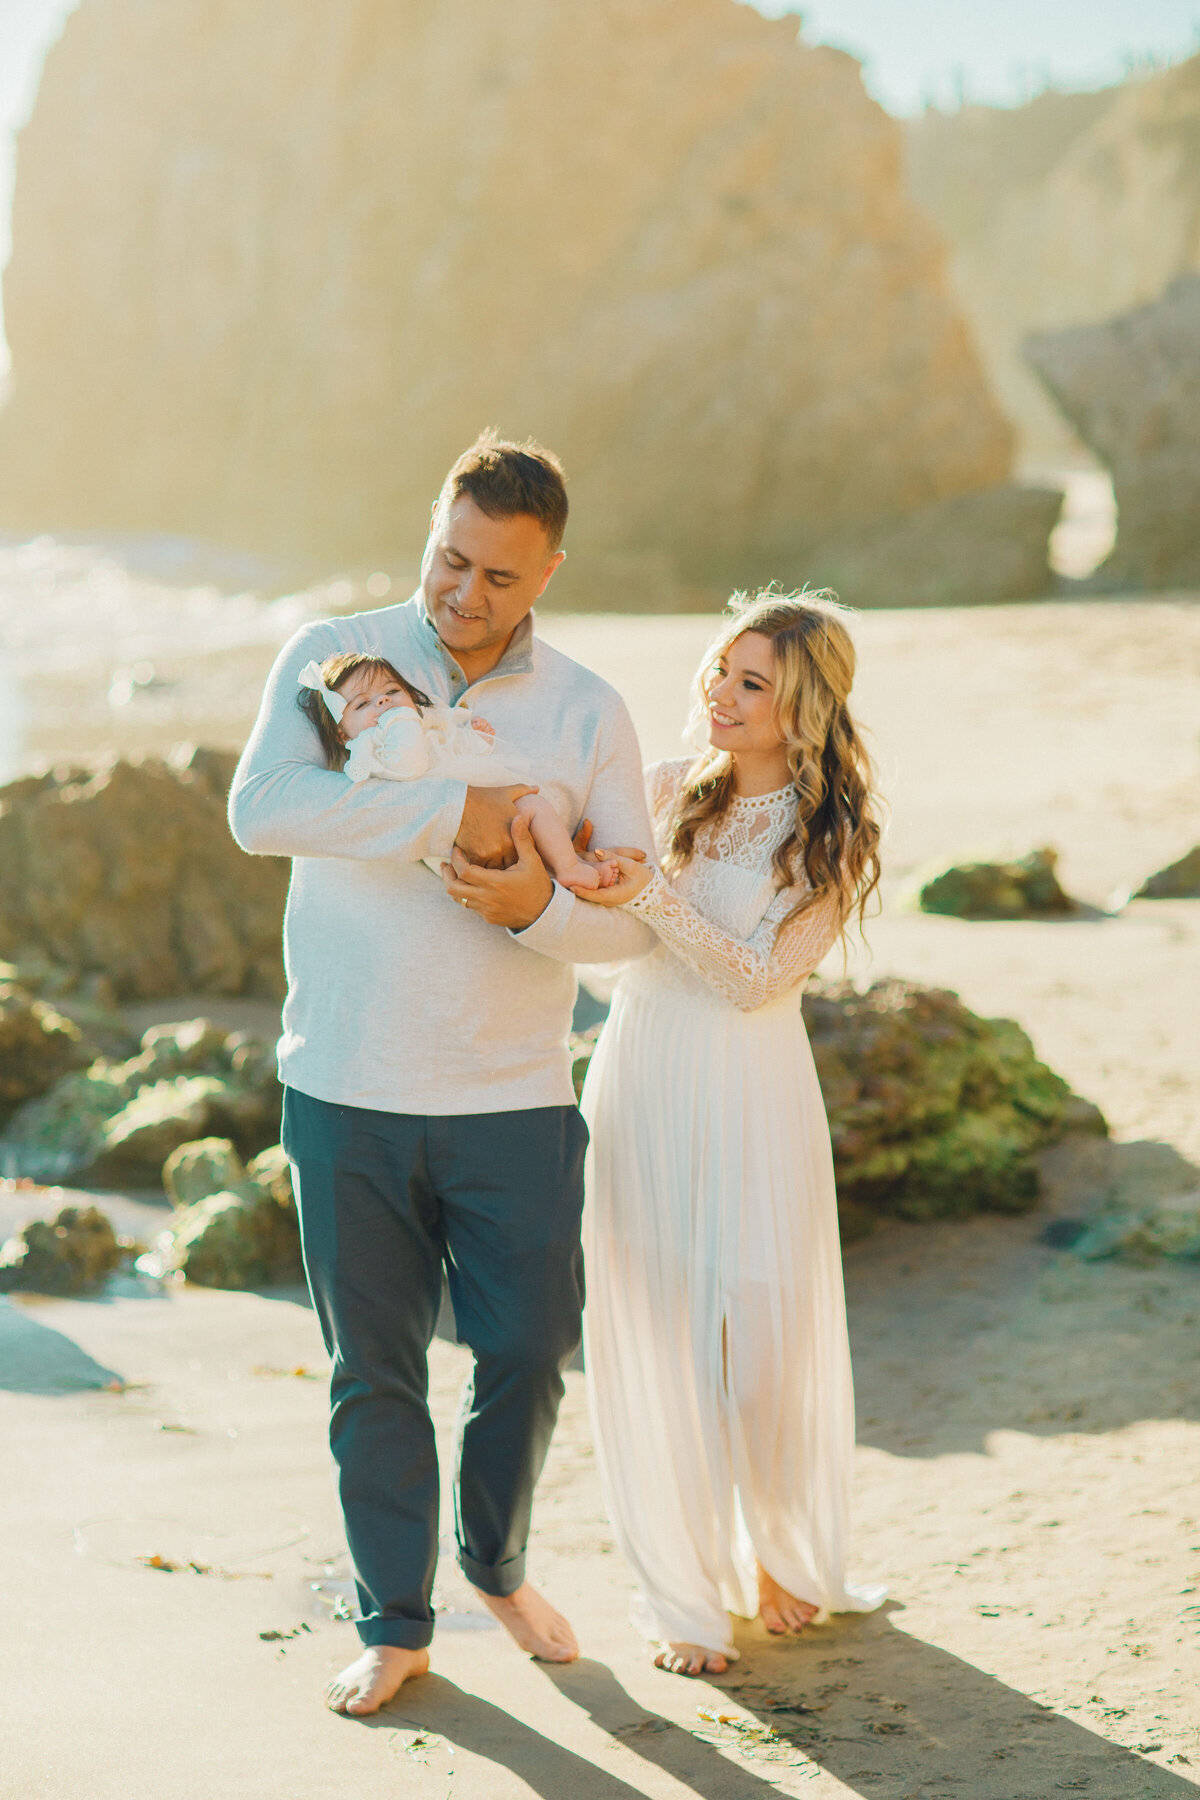 Family Portrait Photo Of Couple Walking With Their Baby In The Sun Los Angeles